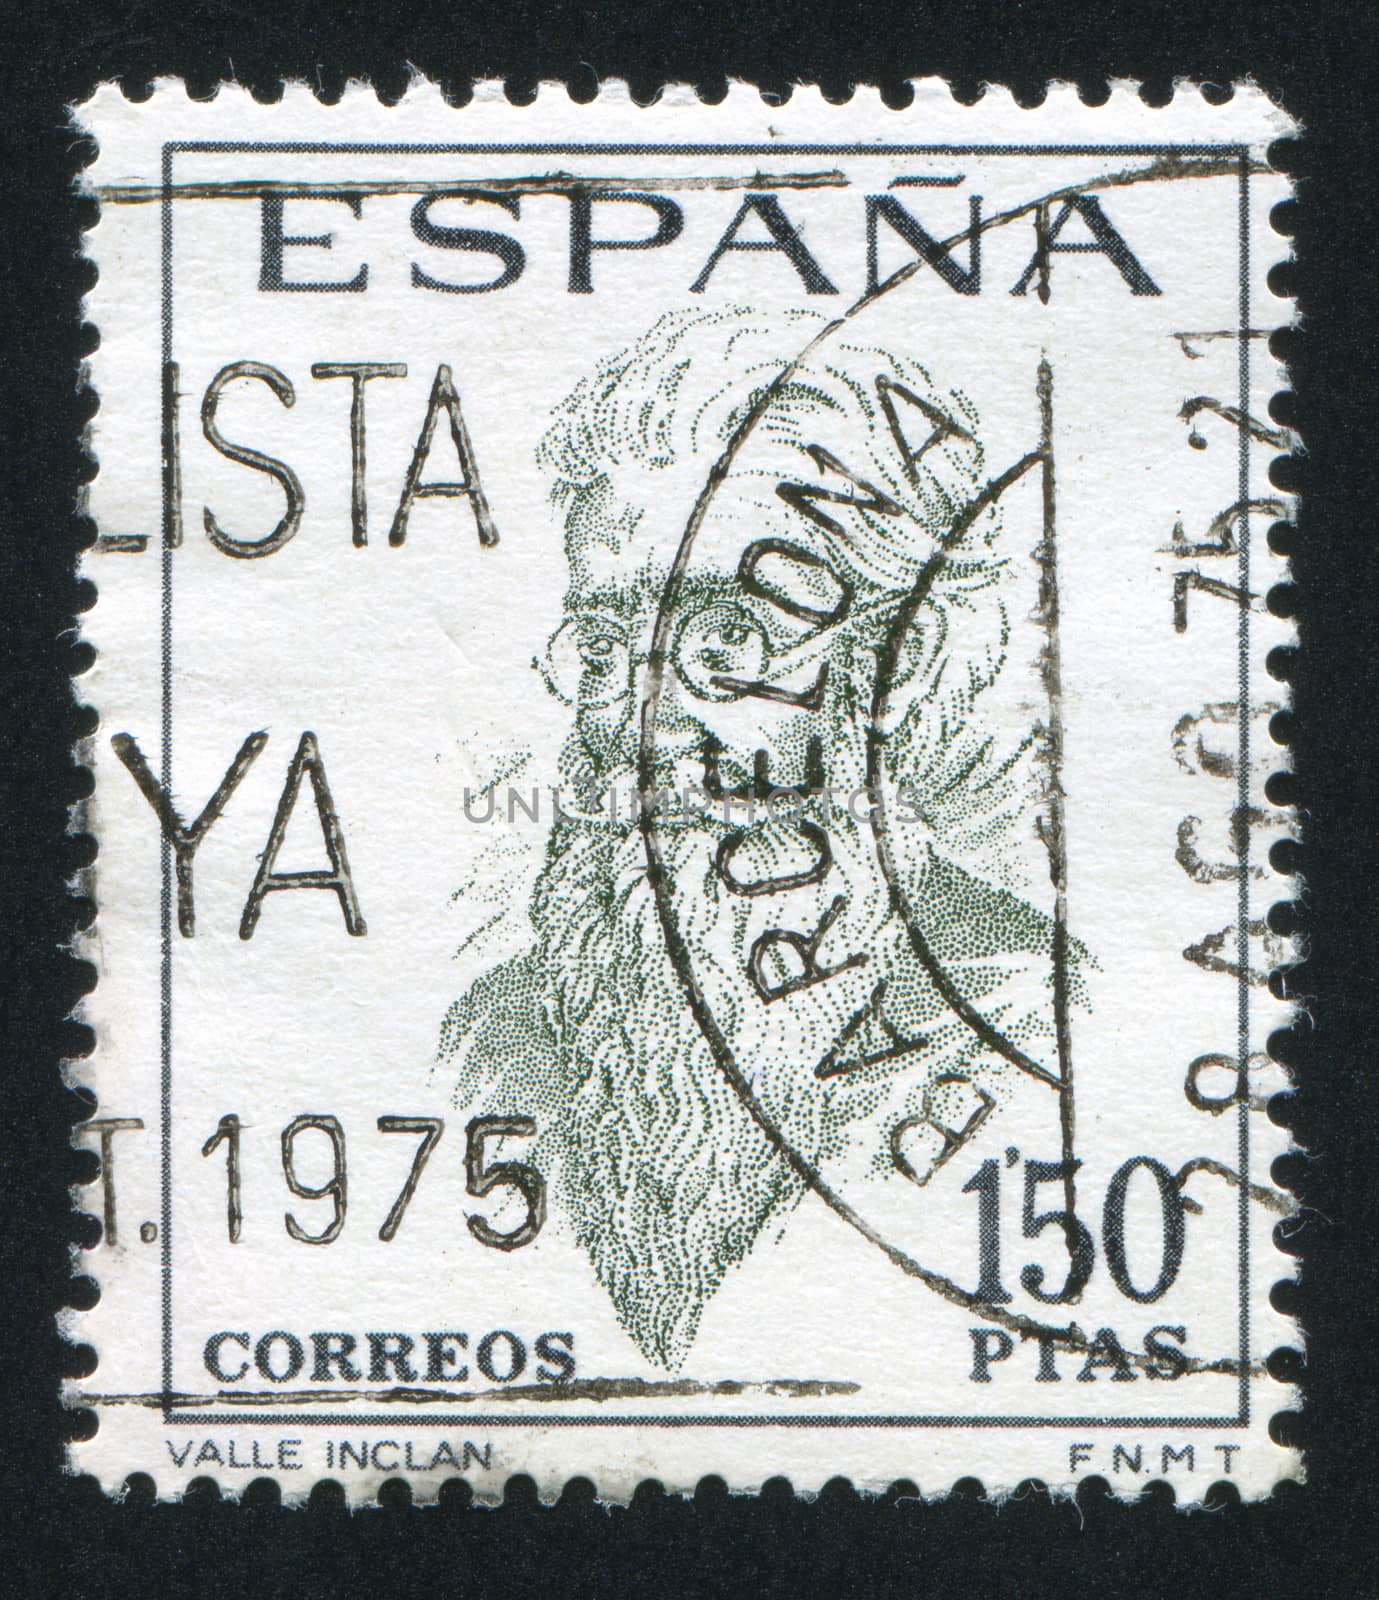 SPAIN - CIRCA 1966 stamp printed by Spain, shows Ramon del Valle Inclan, circa 1966